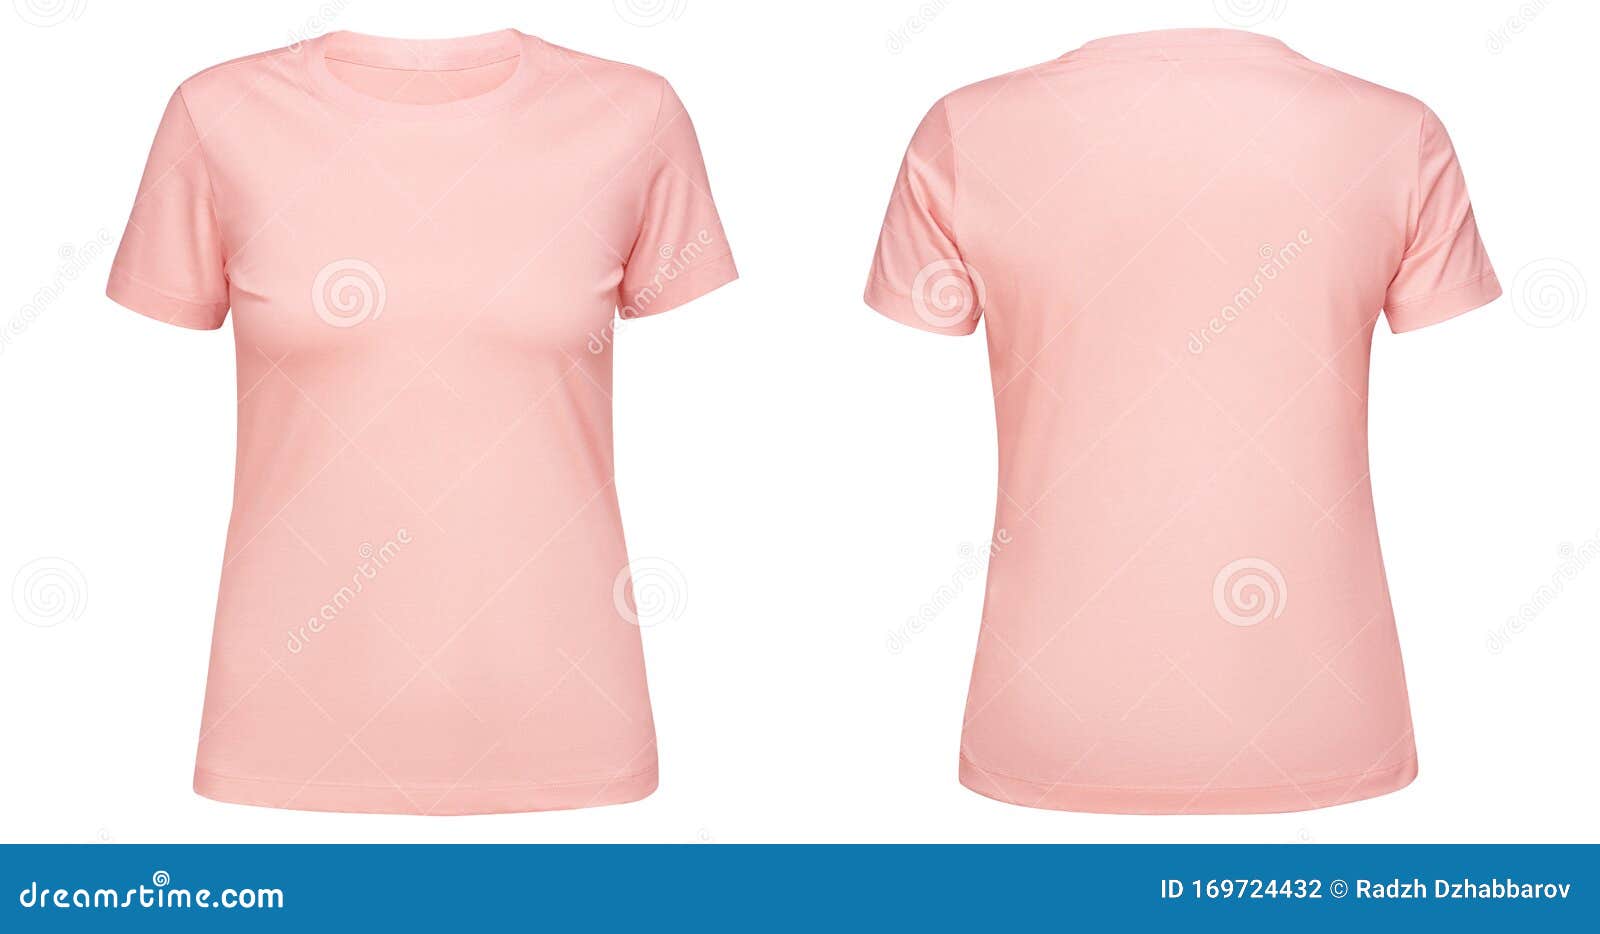 pink t shirt front and back